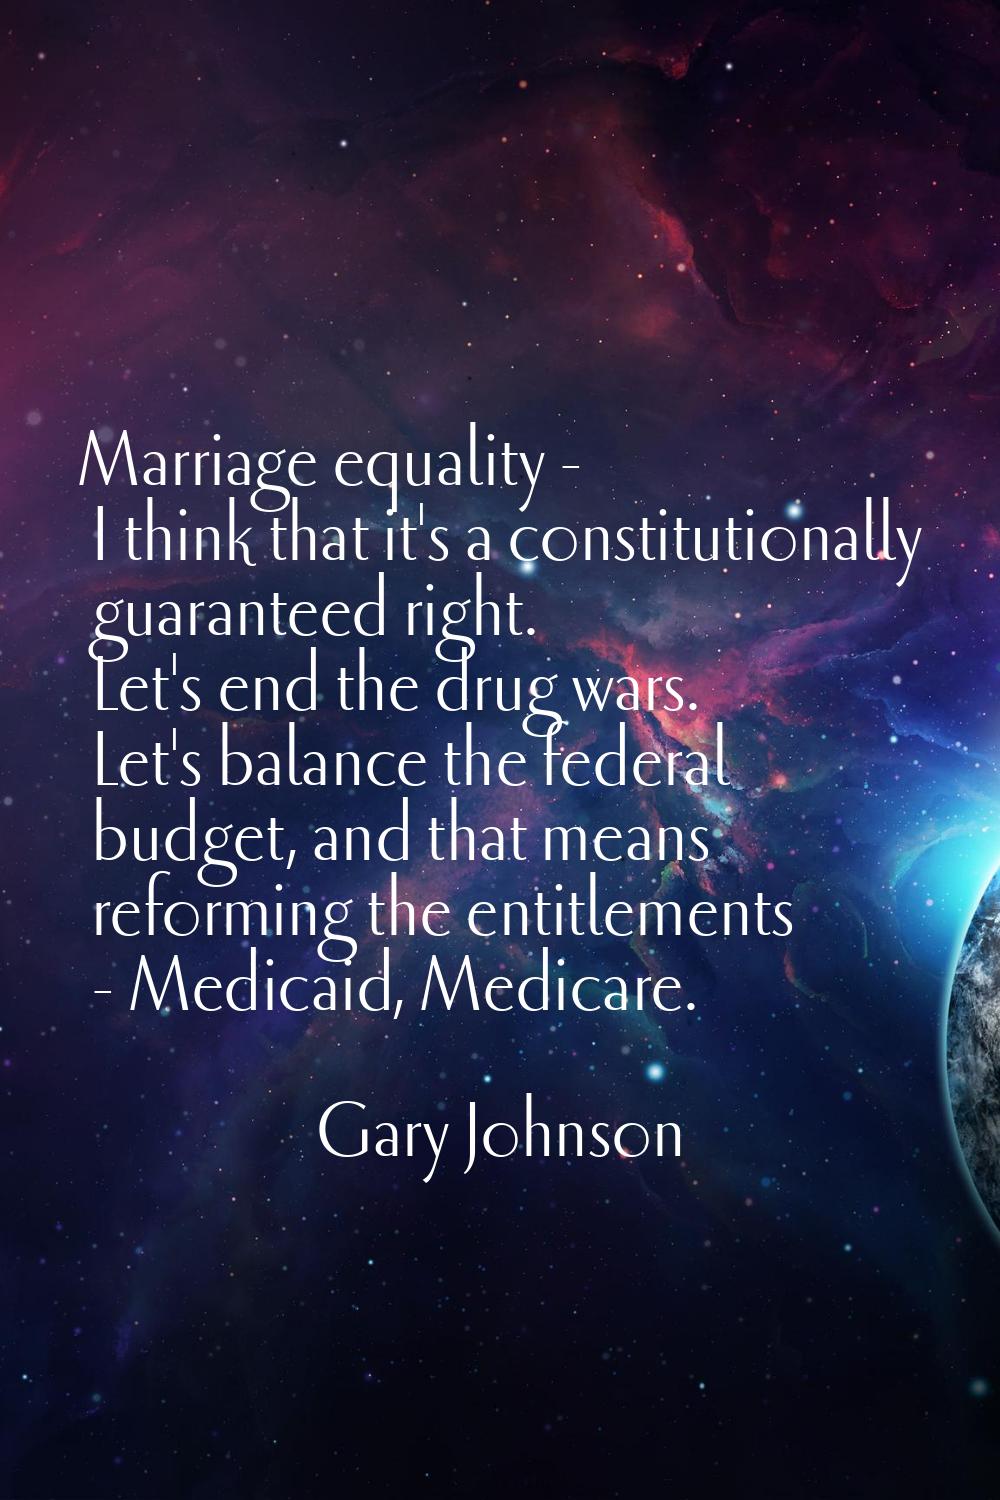 Marriage equality - I think that it's a constitutionally guaranteed right. Let's end the drug wars.